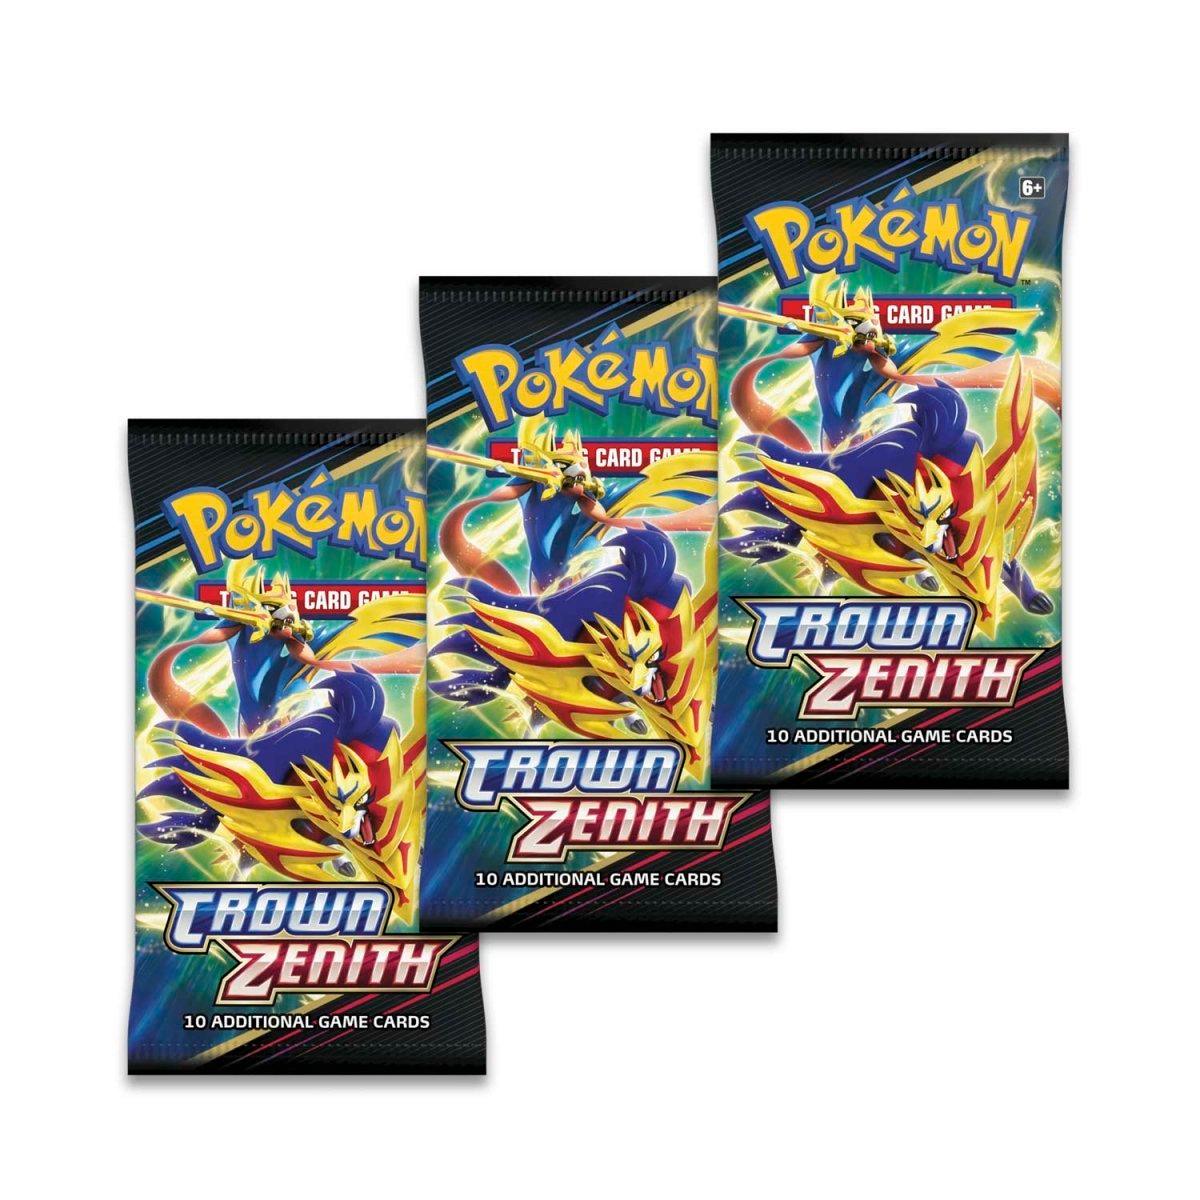 Pokemon Triple Booster Pack - Crown Zenith - 3 Booster Packs & Inteleon Promo Card & Pin - Hobby Champion Inc